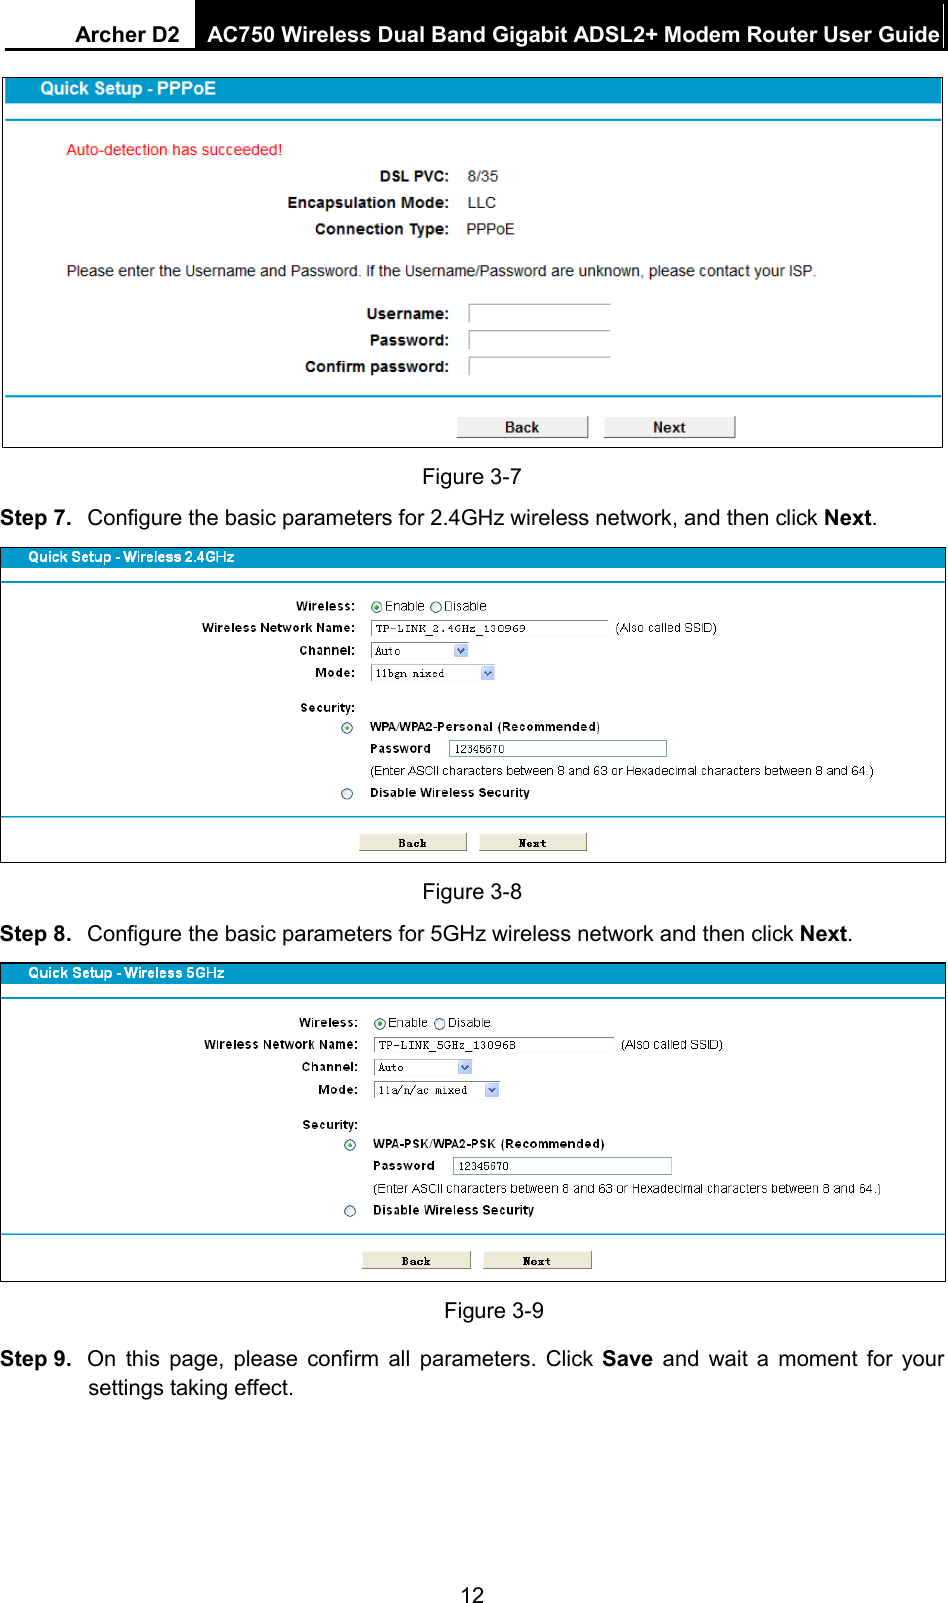 Archer D2 AC750 Wireless Dual Band Gigabit ADSL2+ Modem Router User Guide   Figure 3-7   Step 7. Configure the basic parameters for 2.4GHz wireless network, and then click Next.  Figure 3-8 Step 8. Configure the basic parameters for 5GHz wireless network and then click Next.  Figure 3-9 Step 9. On this page, please confirm all parameters. Click  Save and wait a  moment for  your settings taking effect. 12 